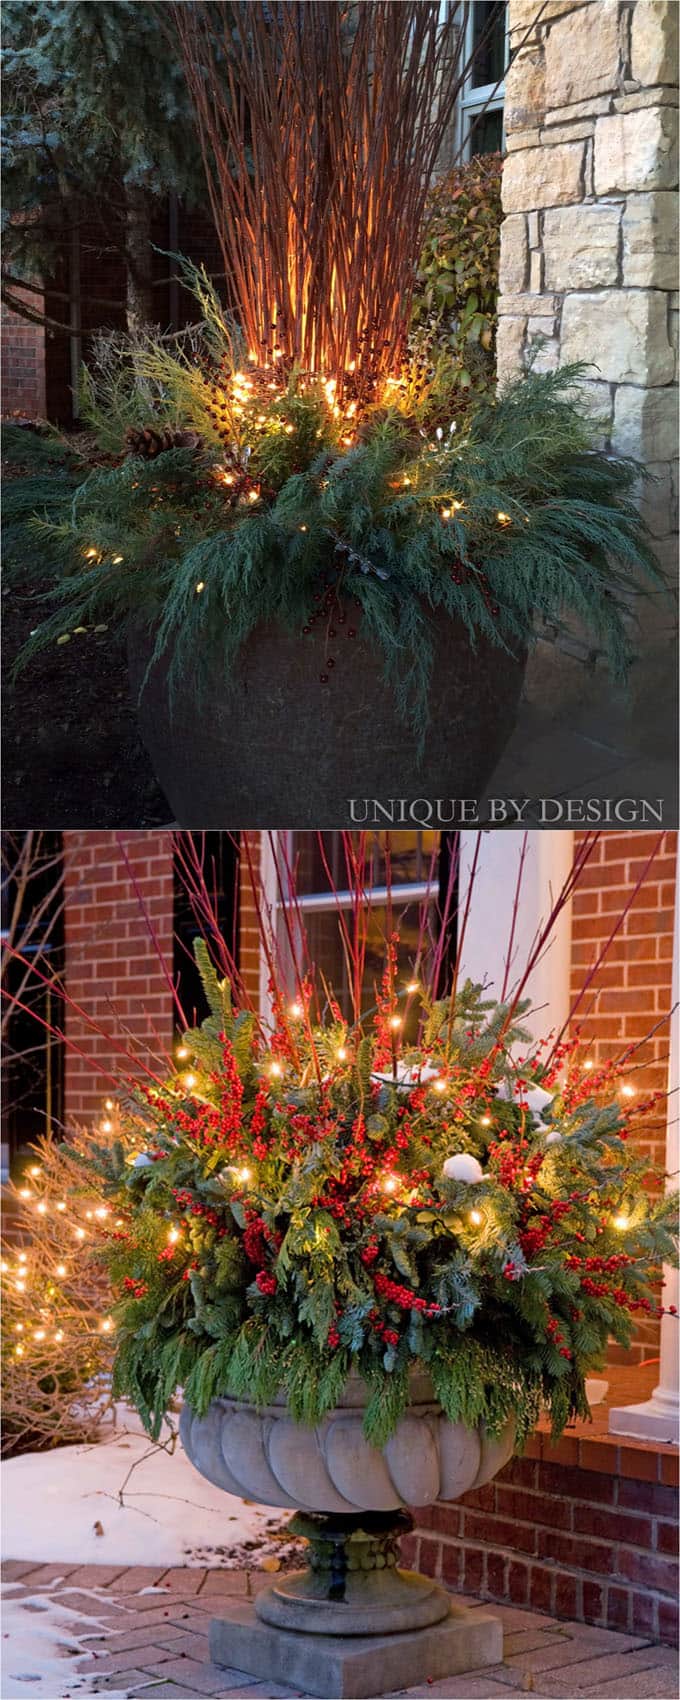 24 Stunning Christmas pots and planters to DIY for almost free! How to create colorful winter planters as beautiful Christmas outdoor decorations, with evergreens, berries, pinecones, branches, & creative elements! - A Piece of Rainbow #containergardening #planters #pots #plants #christmas #christmasdecorations #christmasideas #thanksgiving #holiday #gardens #patio #patiodesign #backyard #curbappeal #diy #gardening #gardeningtips #gardendesign #gardenideas #homedecor #homedecorideas